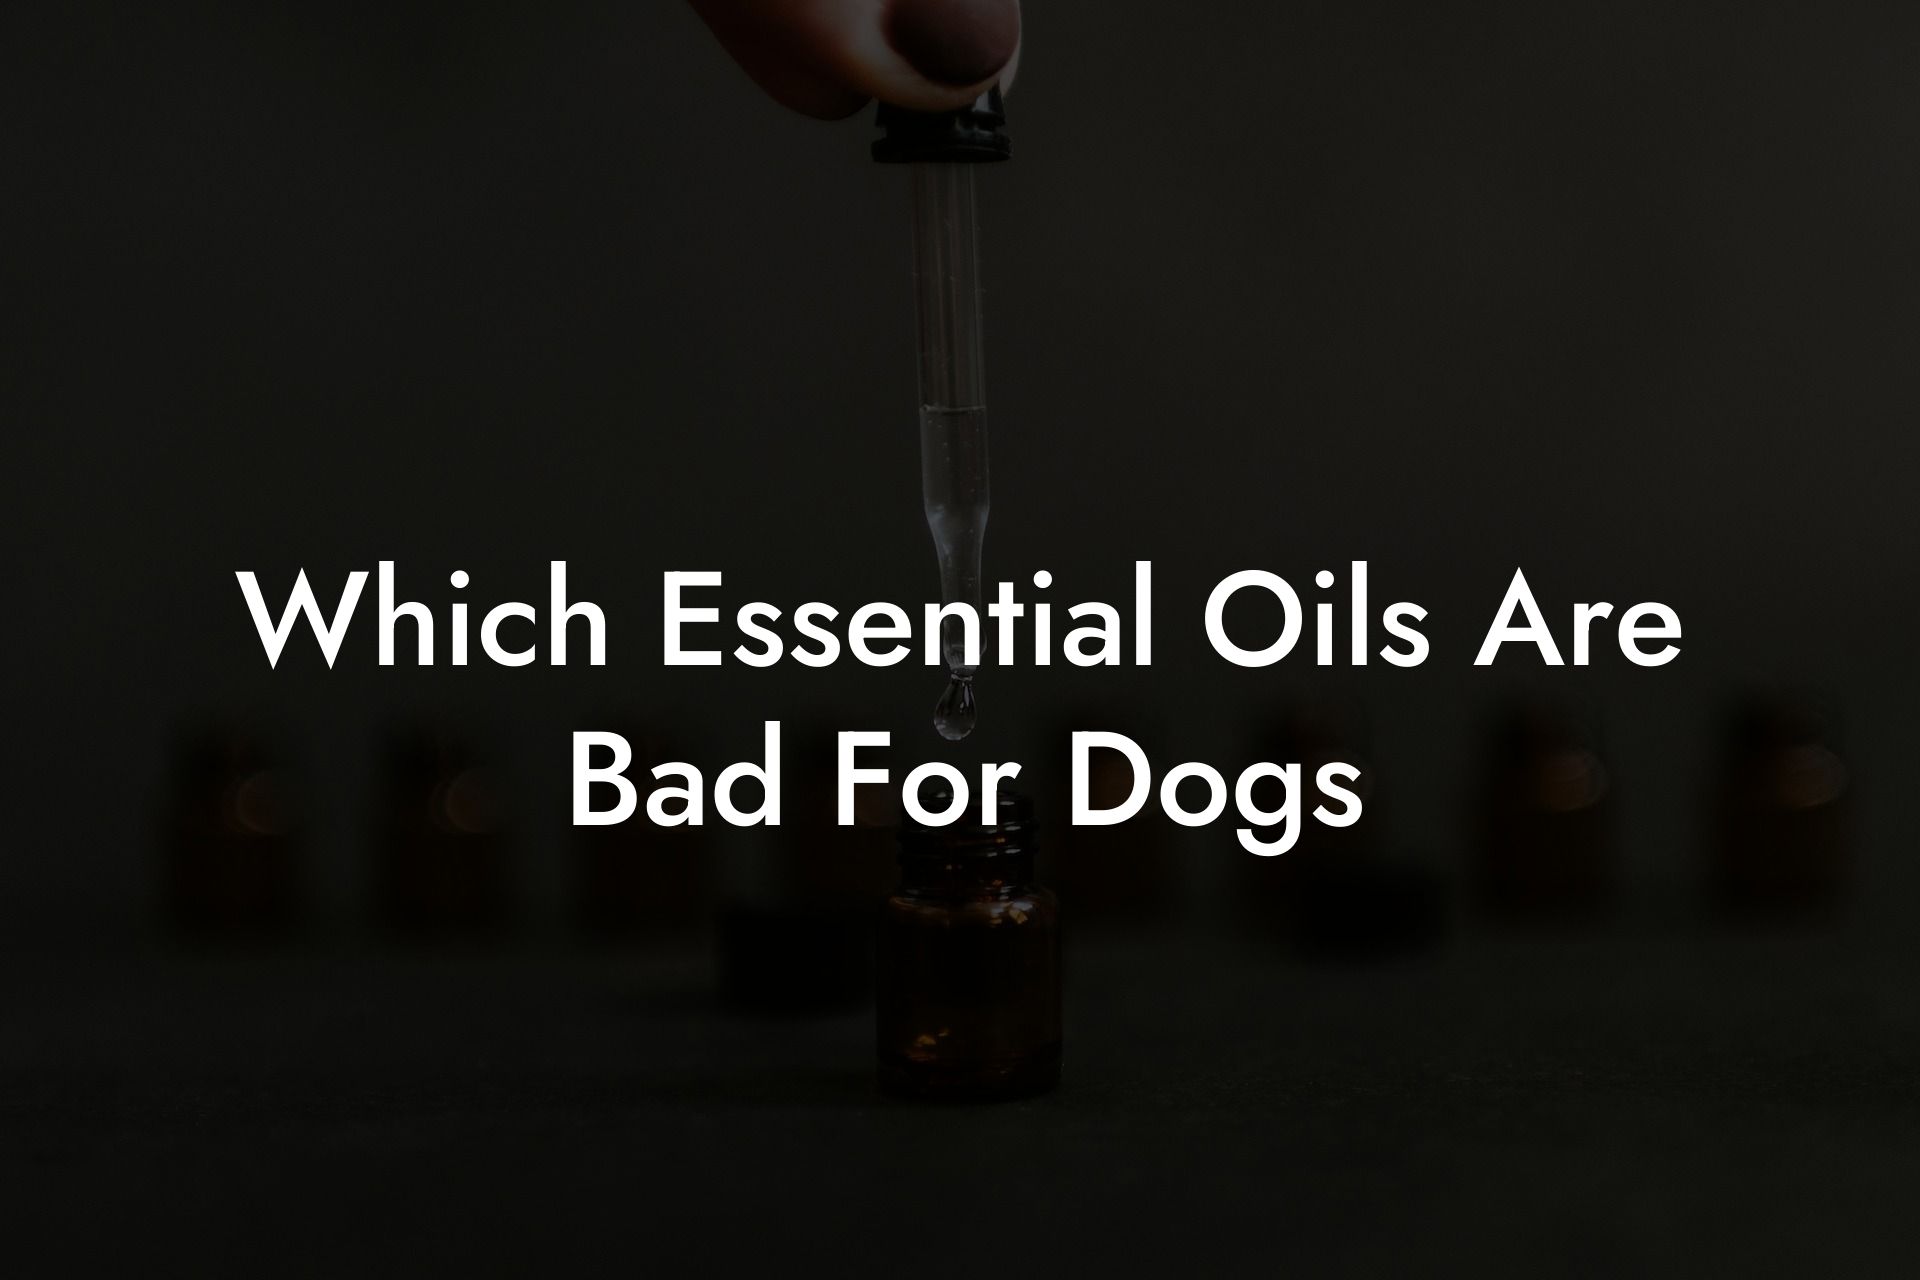 Which Essential Oils Are Bad For Dogs